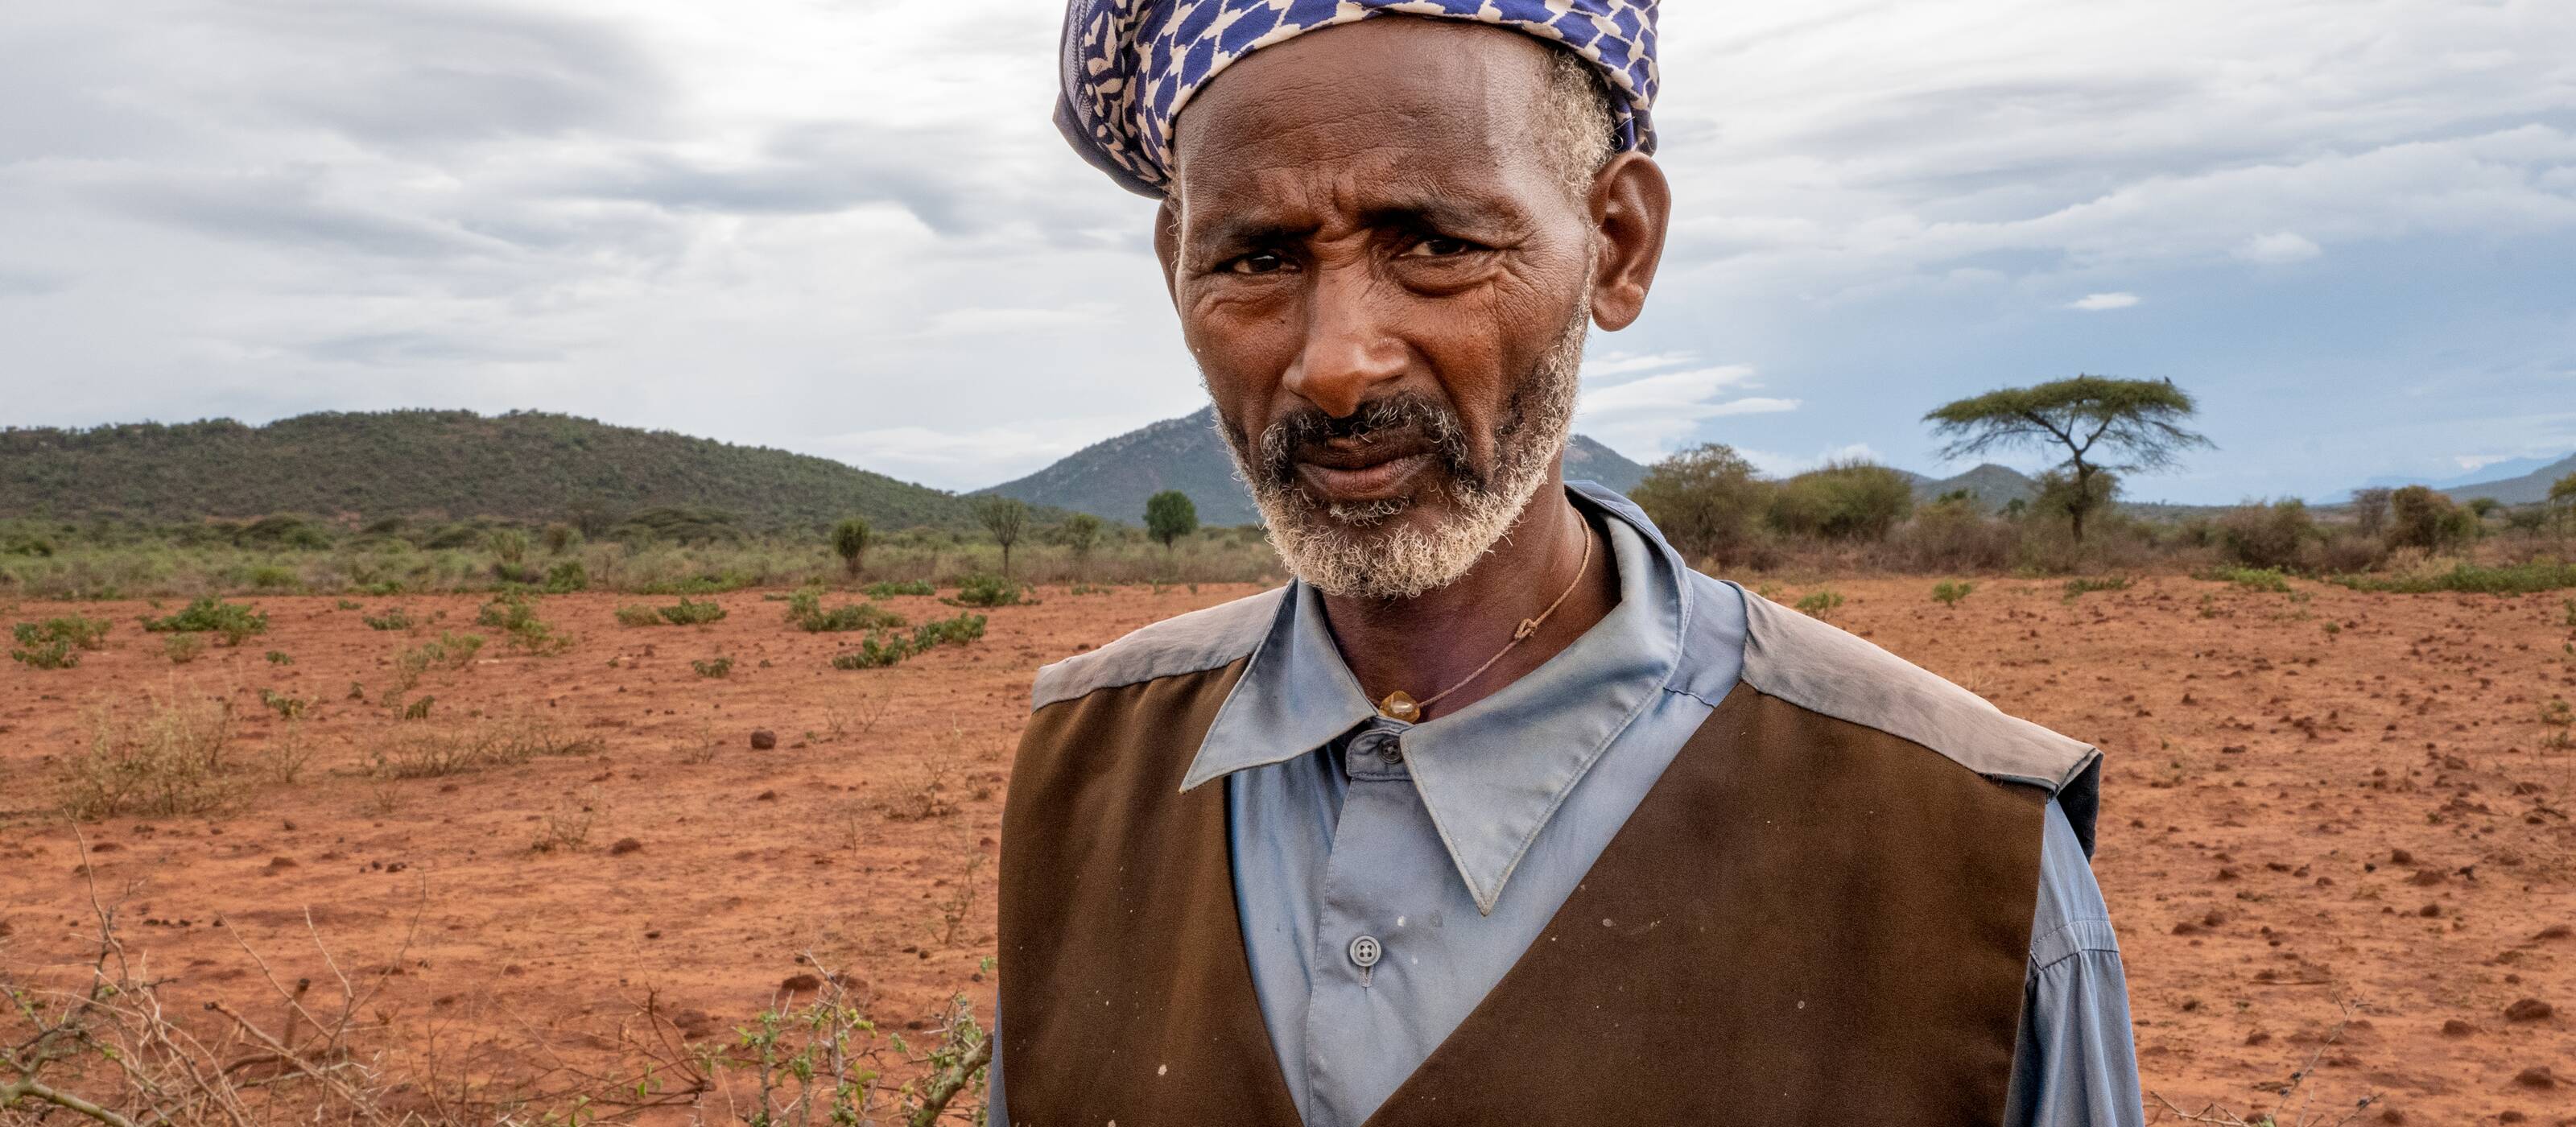 The drought in Ethiopia is affecting the people 